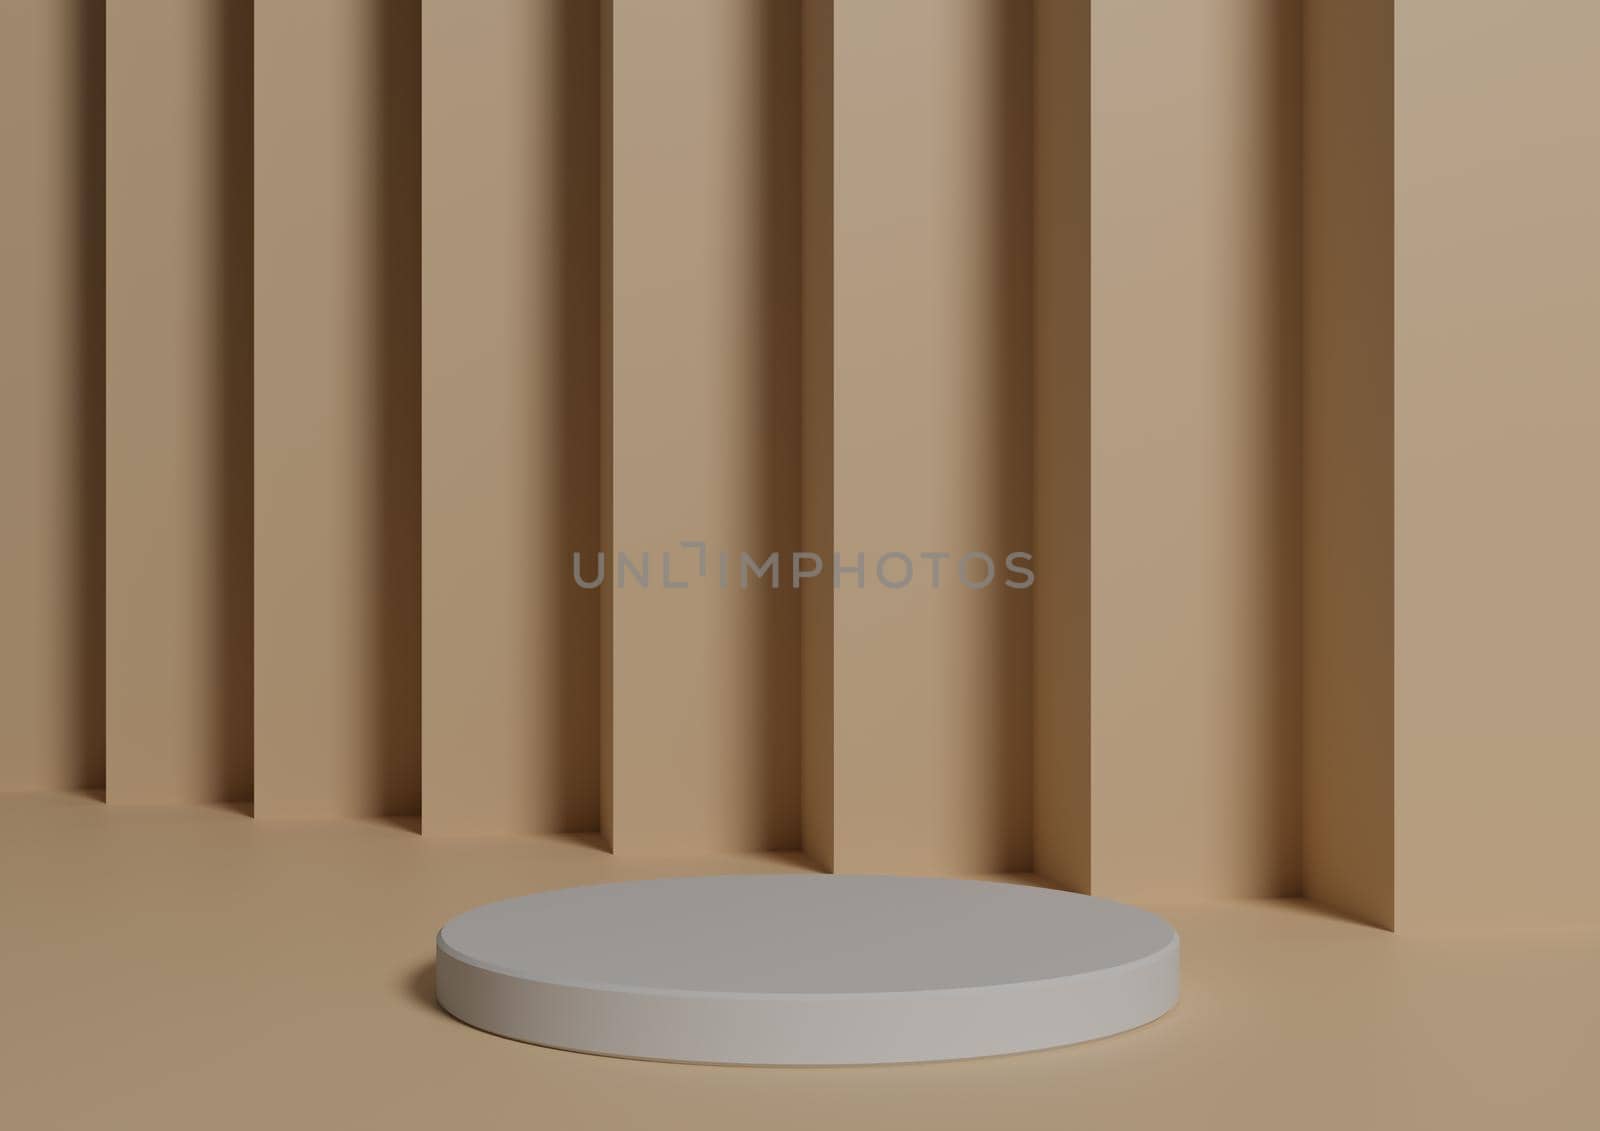 Simple, Minimal 3D Render Composition with One White Cylinder Podium or Stand on Abstract Light Pastel Orange Background for Product Display